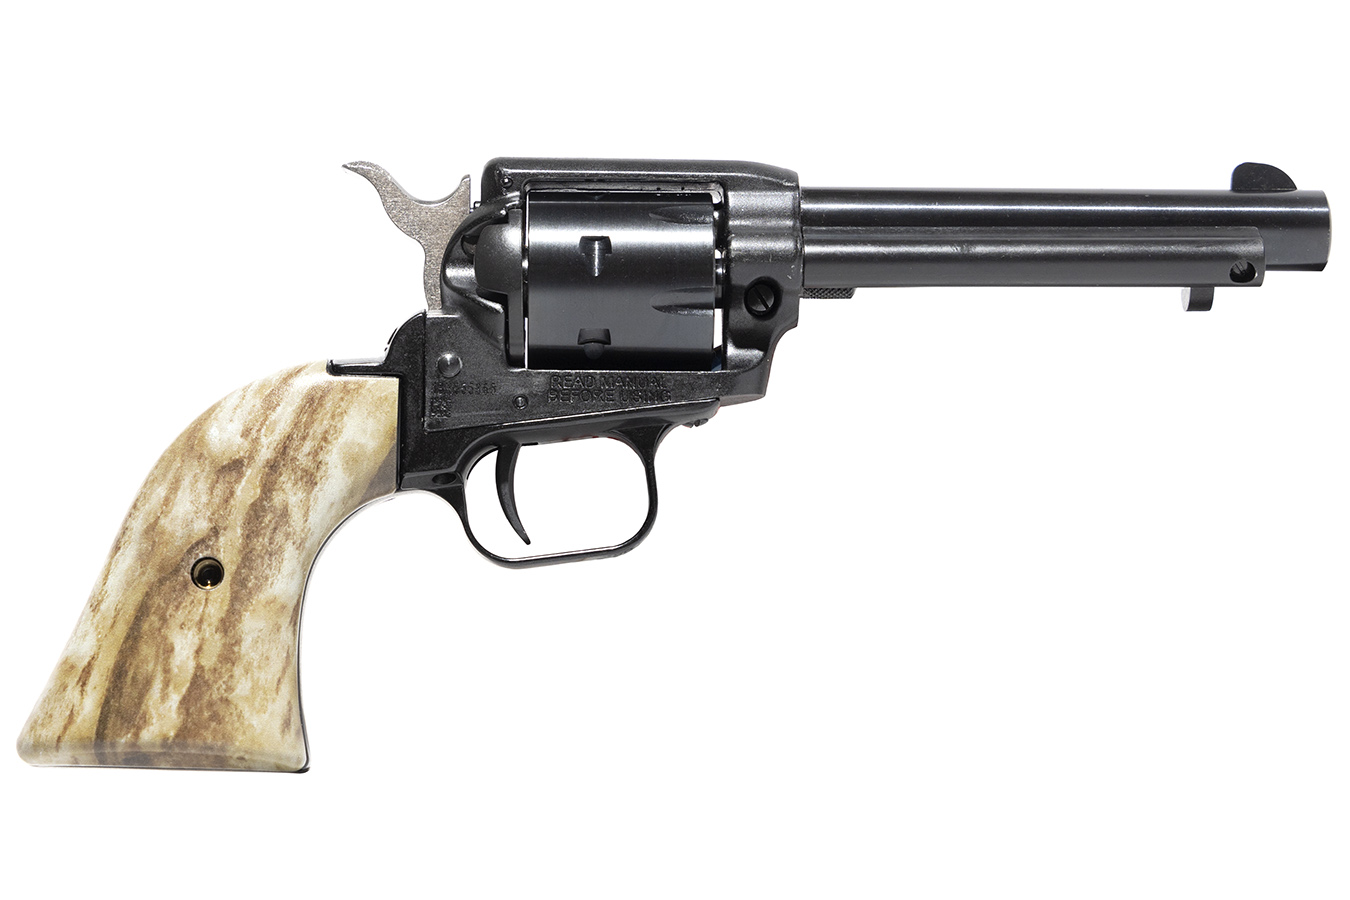 ROUGH RIDER 22CALREVOLVER WITH BLUED BARREL AND STAG GRIPS